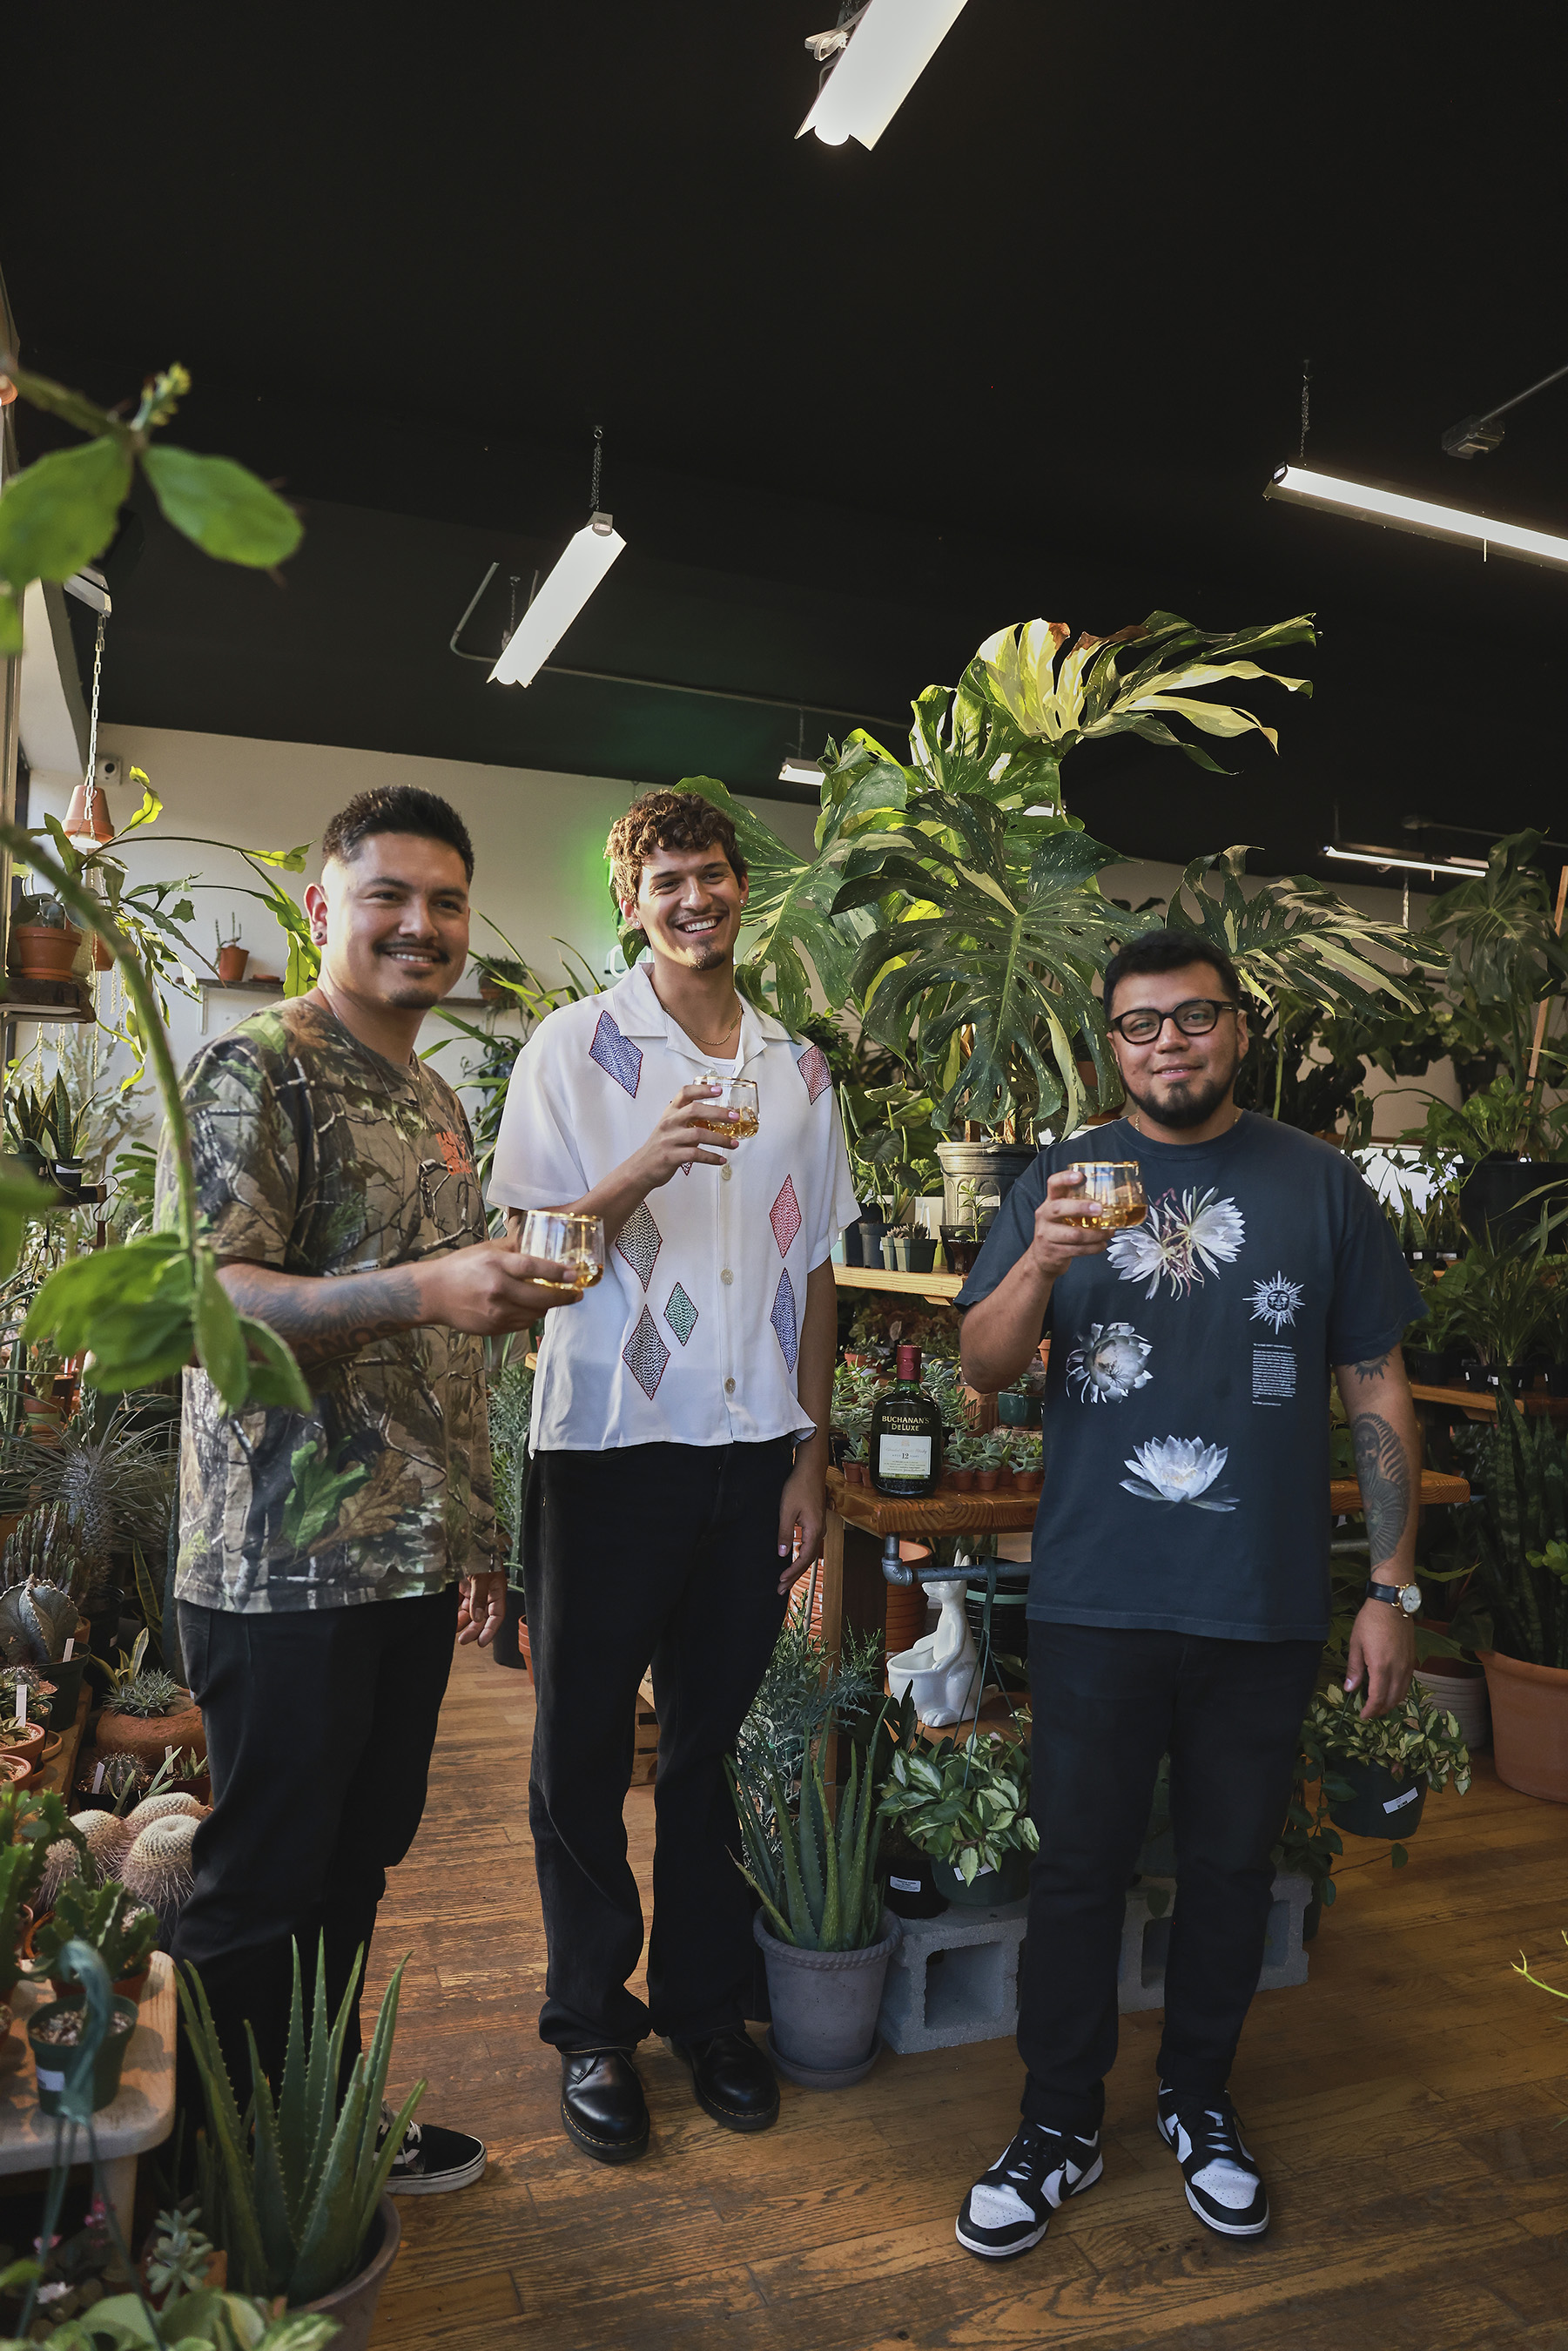 Omar Apollo and Owners of Plant Shop Chicago Toast to the 200% Futuro with Buchanan’s Scotch Whisky